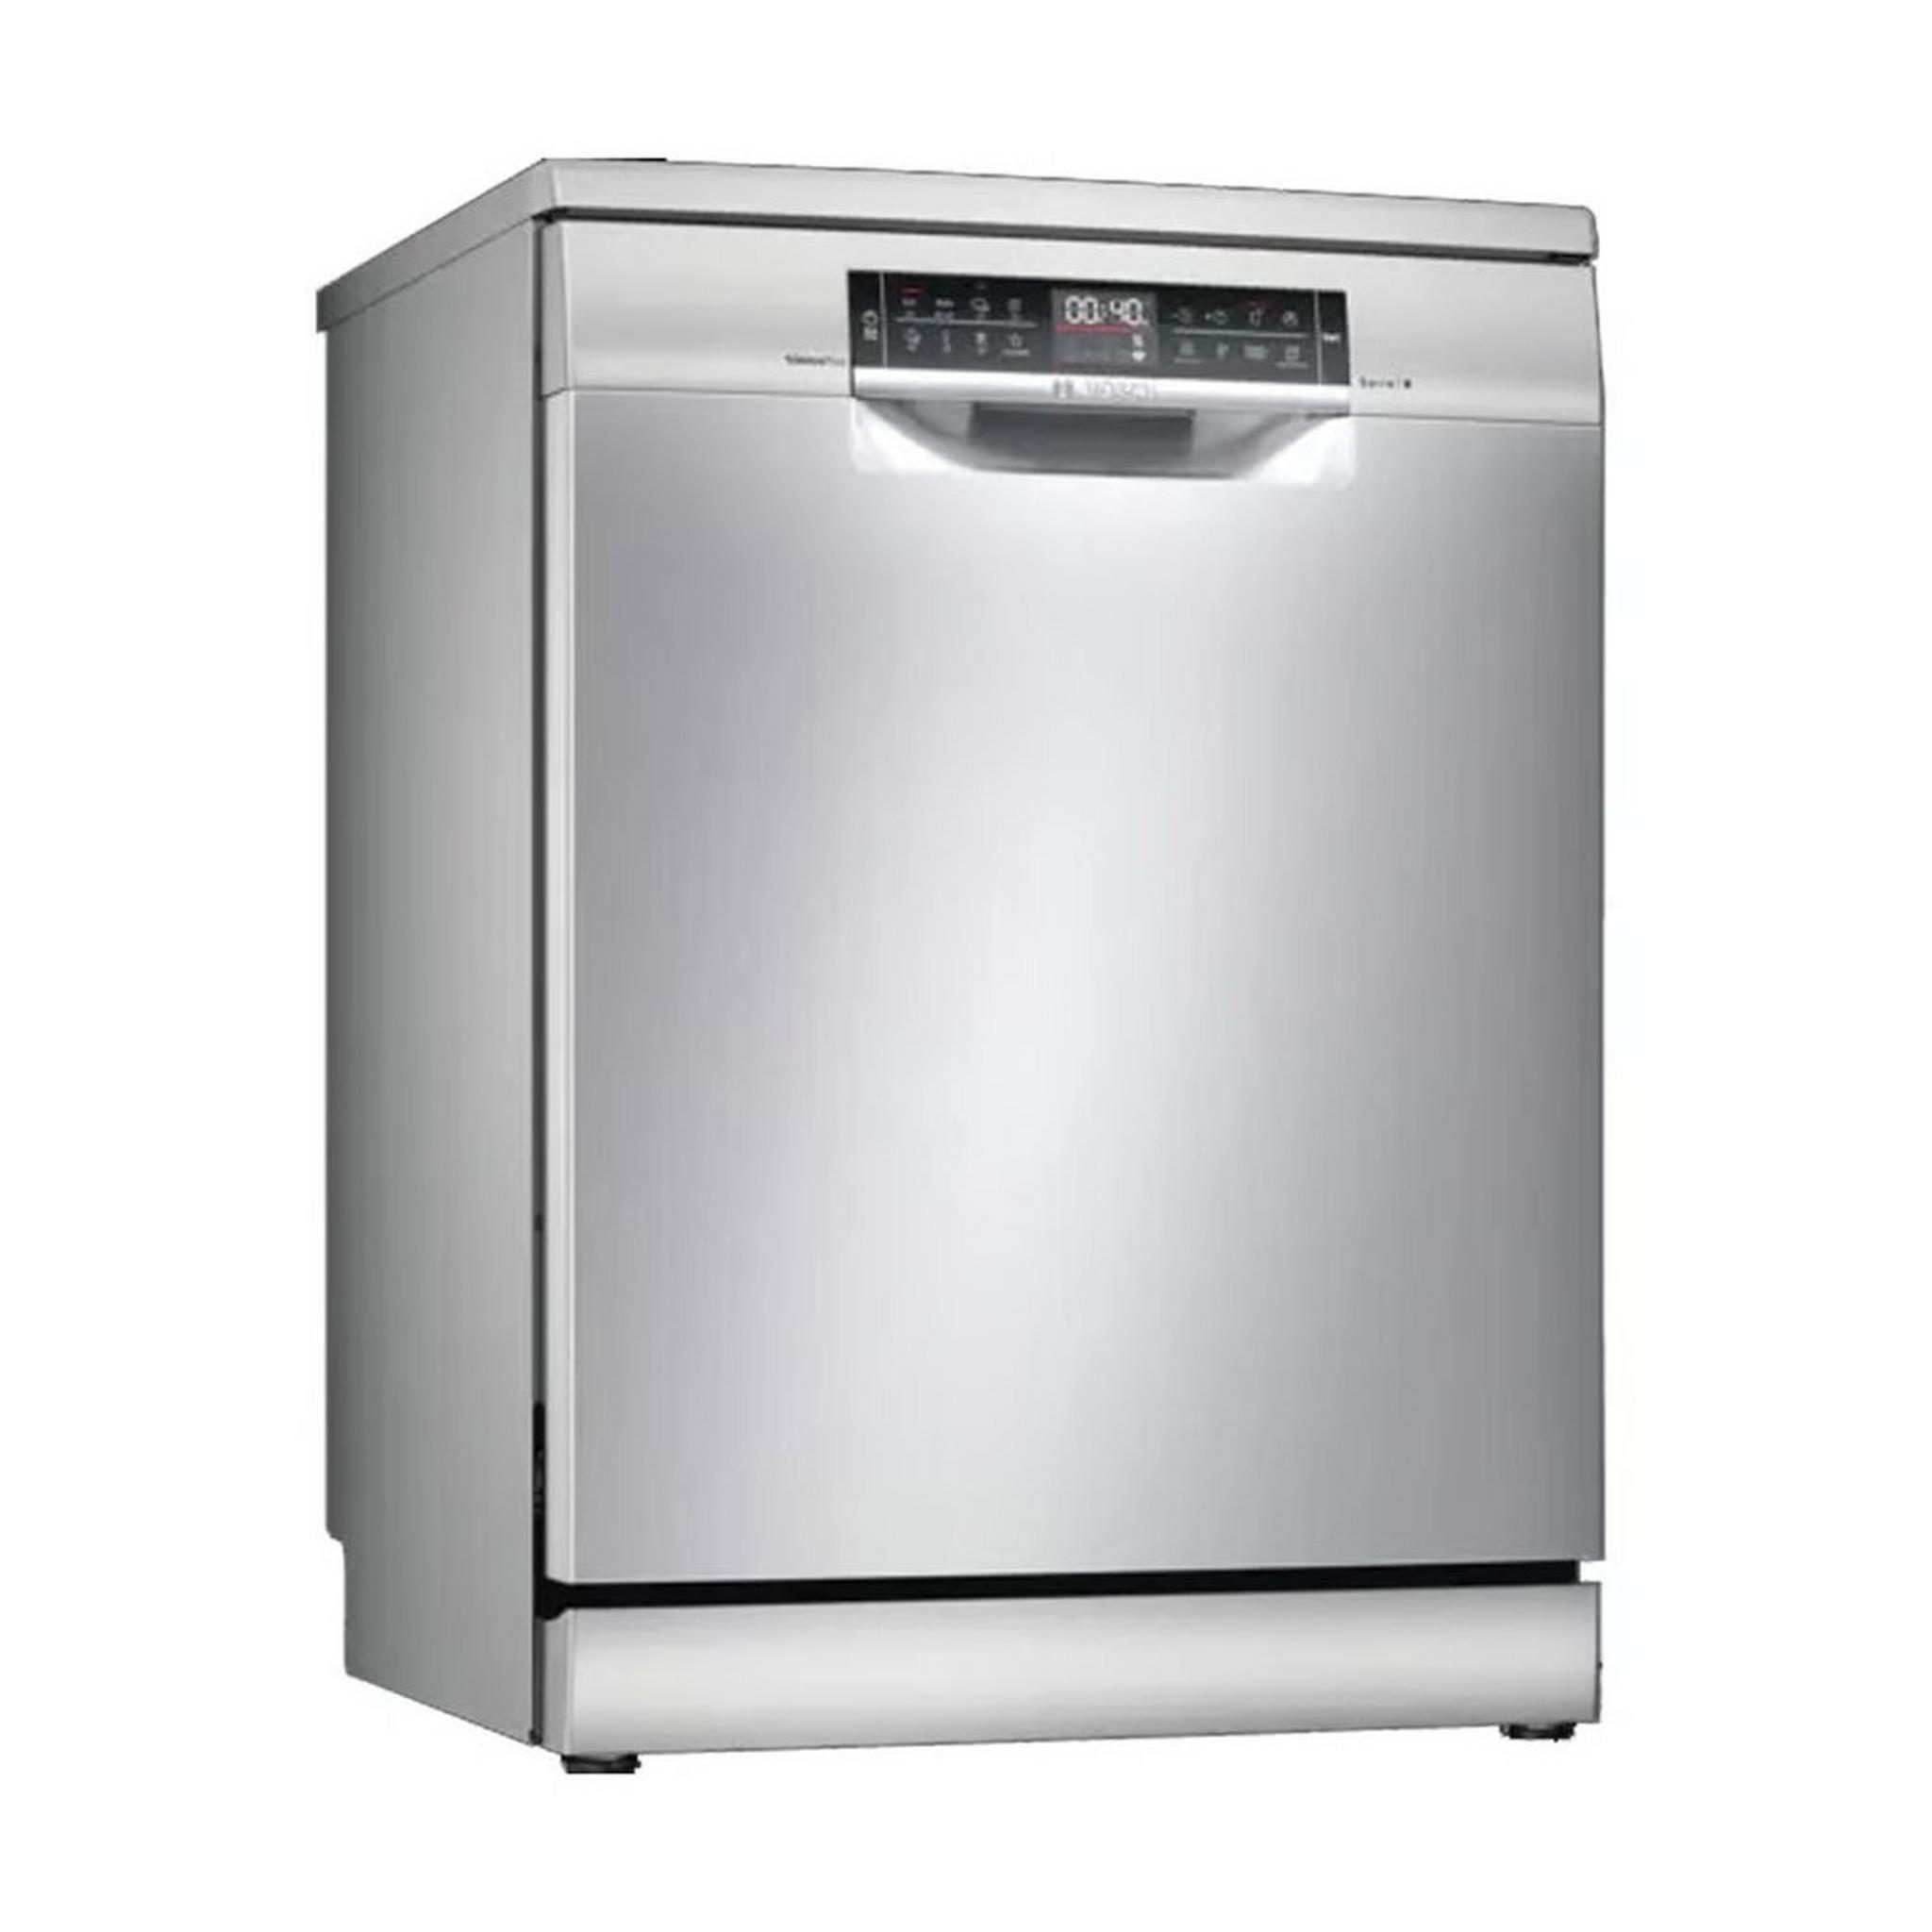 BOSCH Series 6 Free-Standing Dishwasher, 8 Programs, 13 Place Settings, SMS6ECI38M - Silver Inox